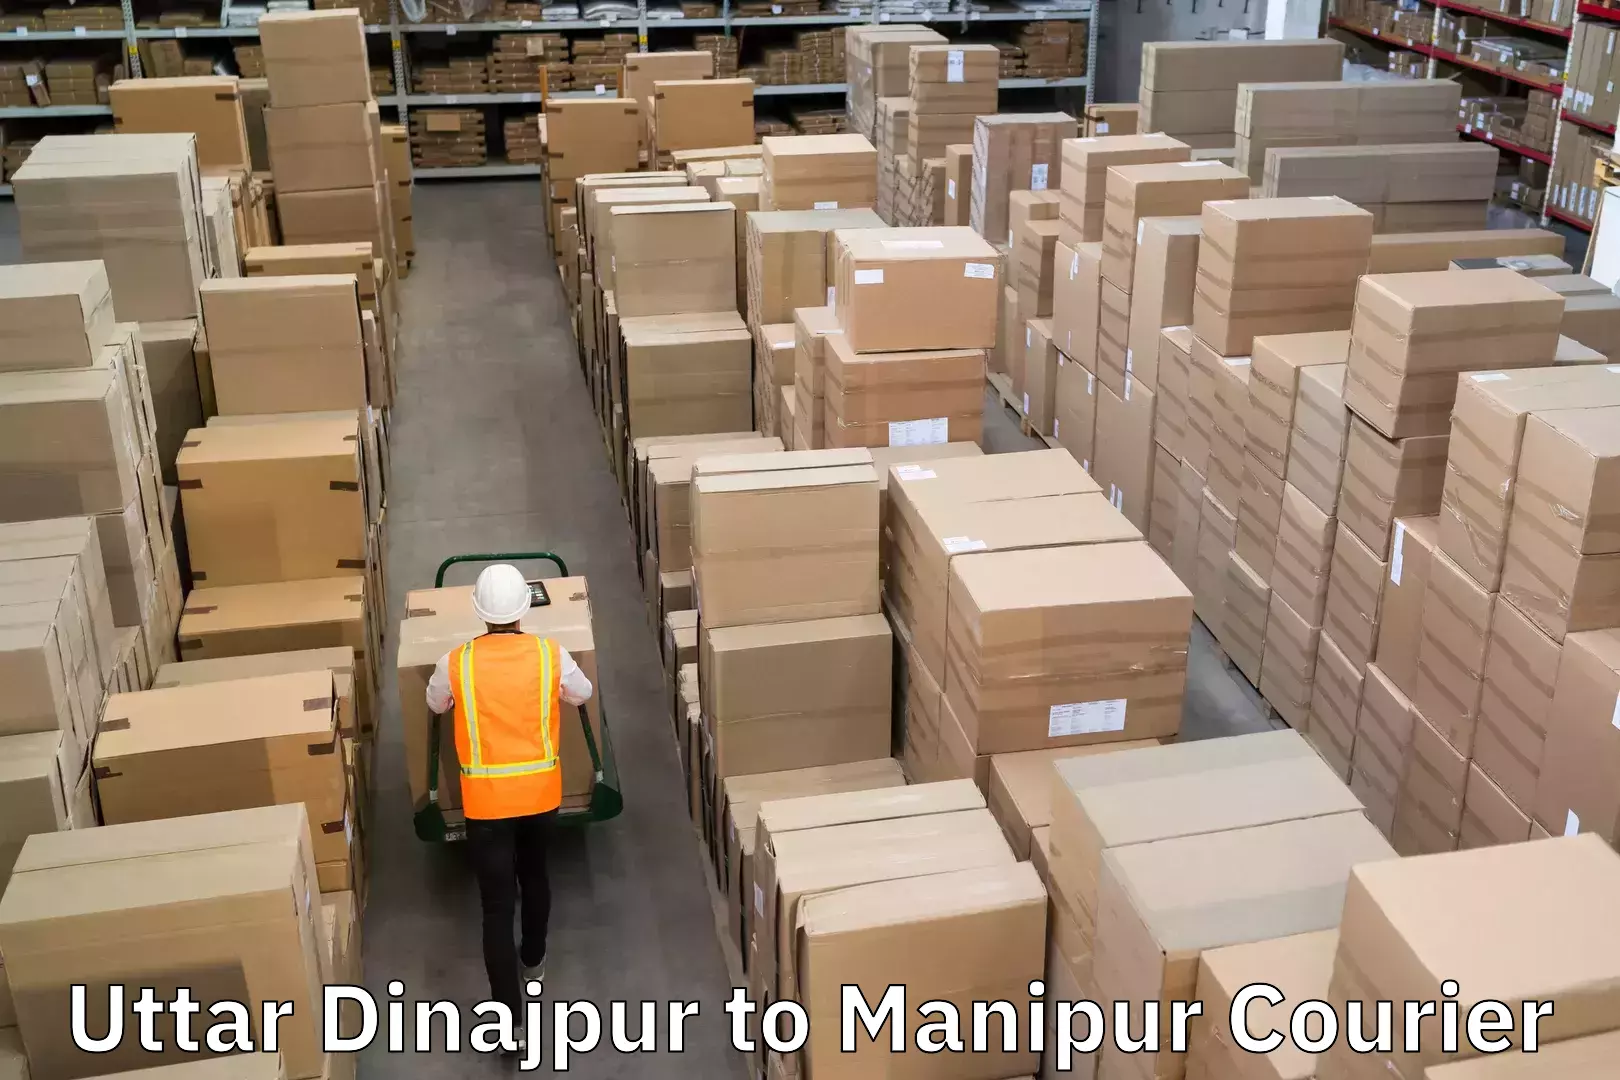 Advanced tracking systems Uttar Dinajpur to Manipur